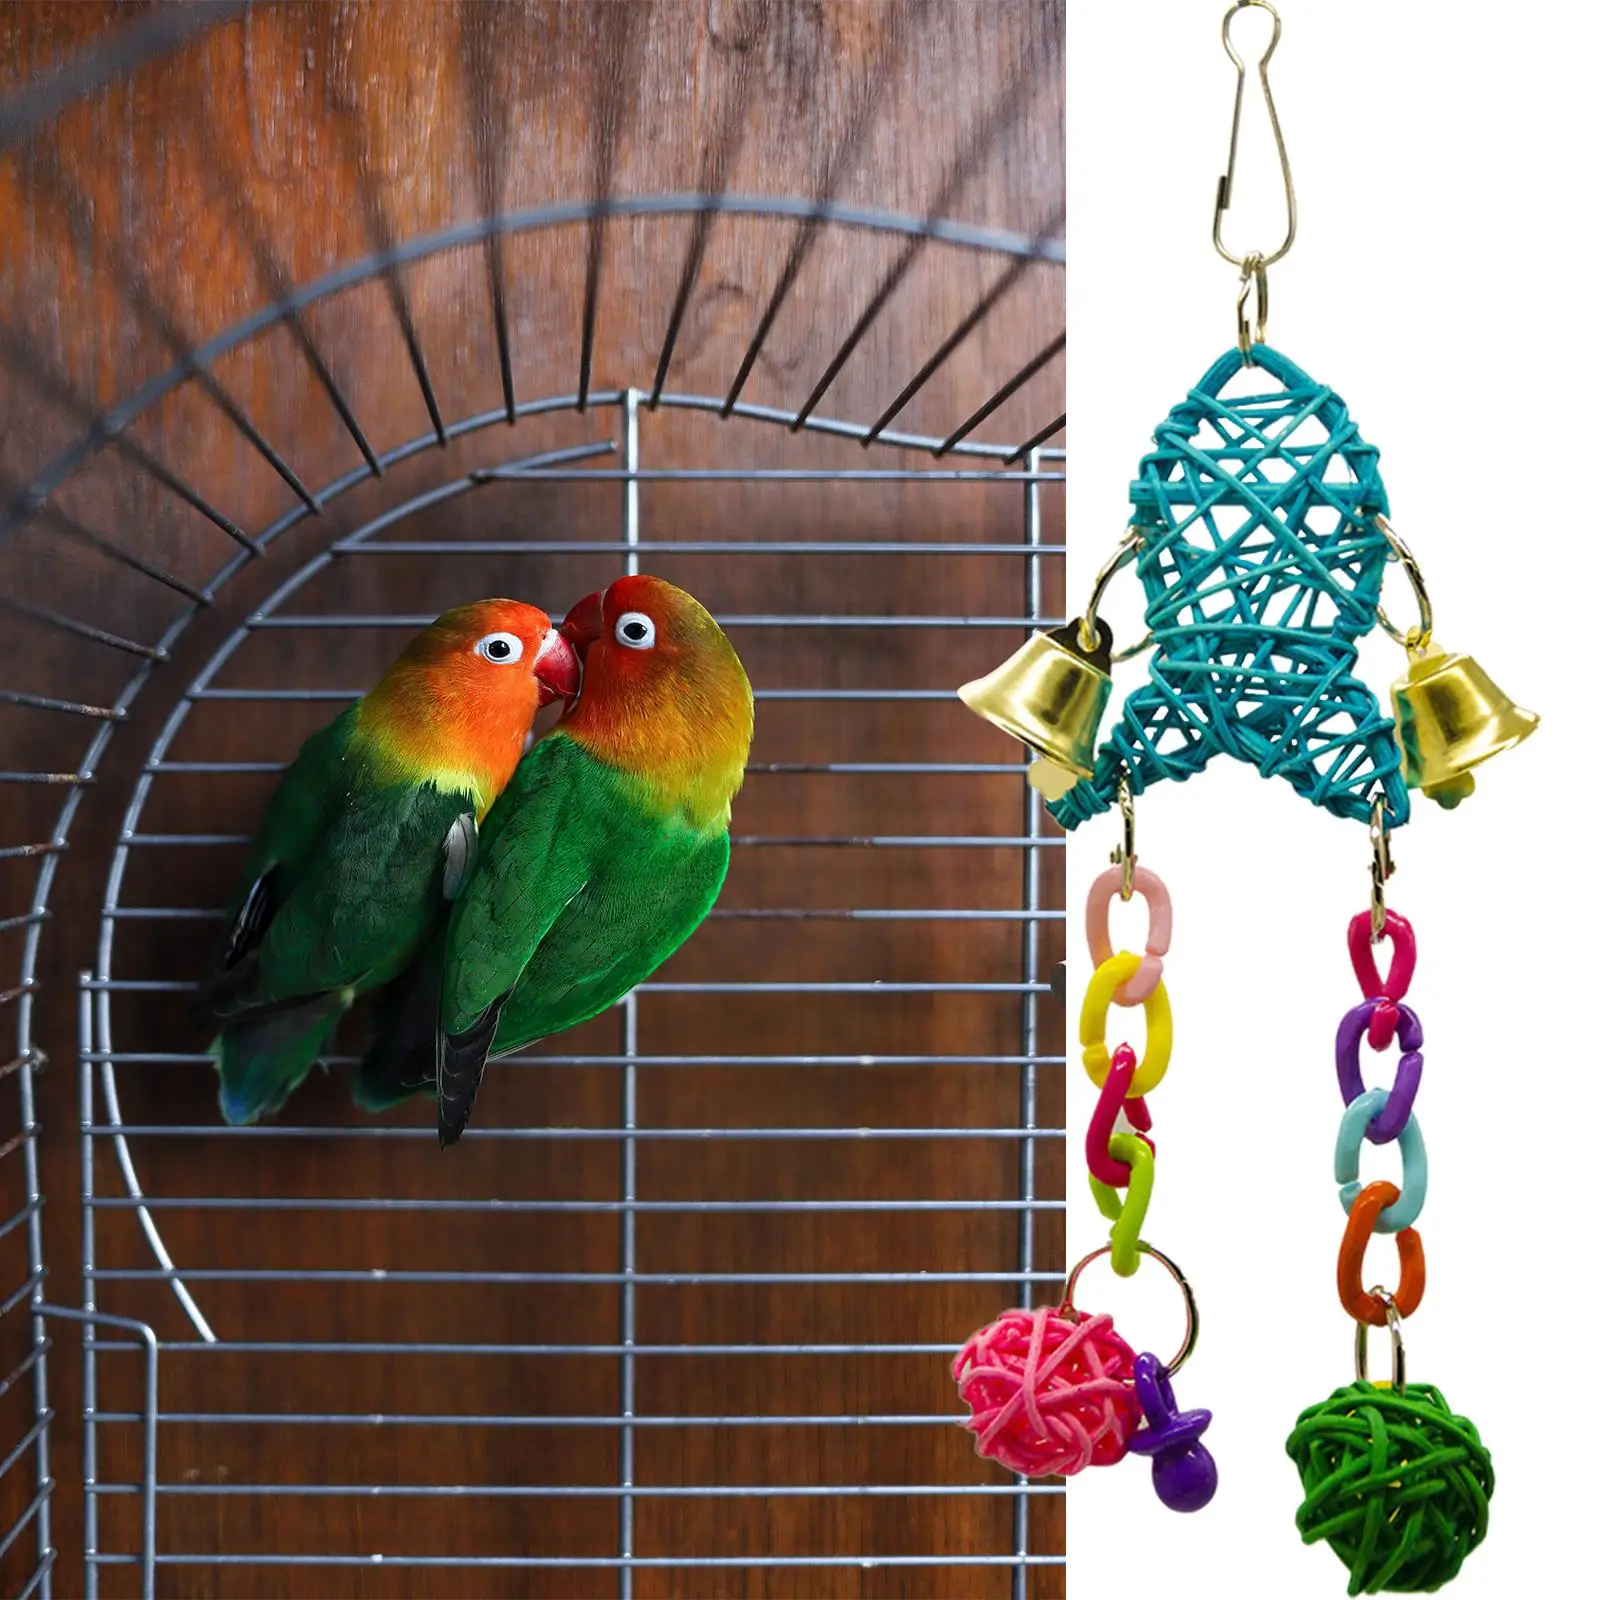 Colorful Parrot Cage Hanging Toys Birds Chewing Bite Boredom Breaker Nest Swing Perches Bird Toy for Conures Budgie Finches